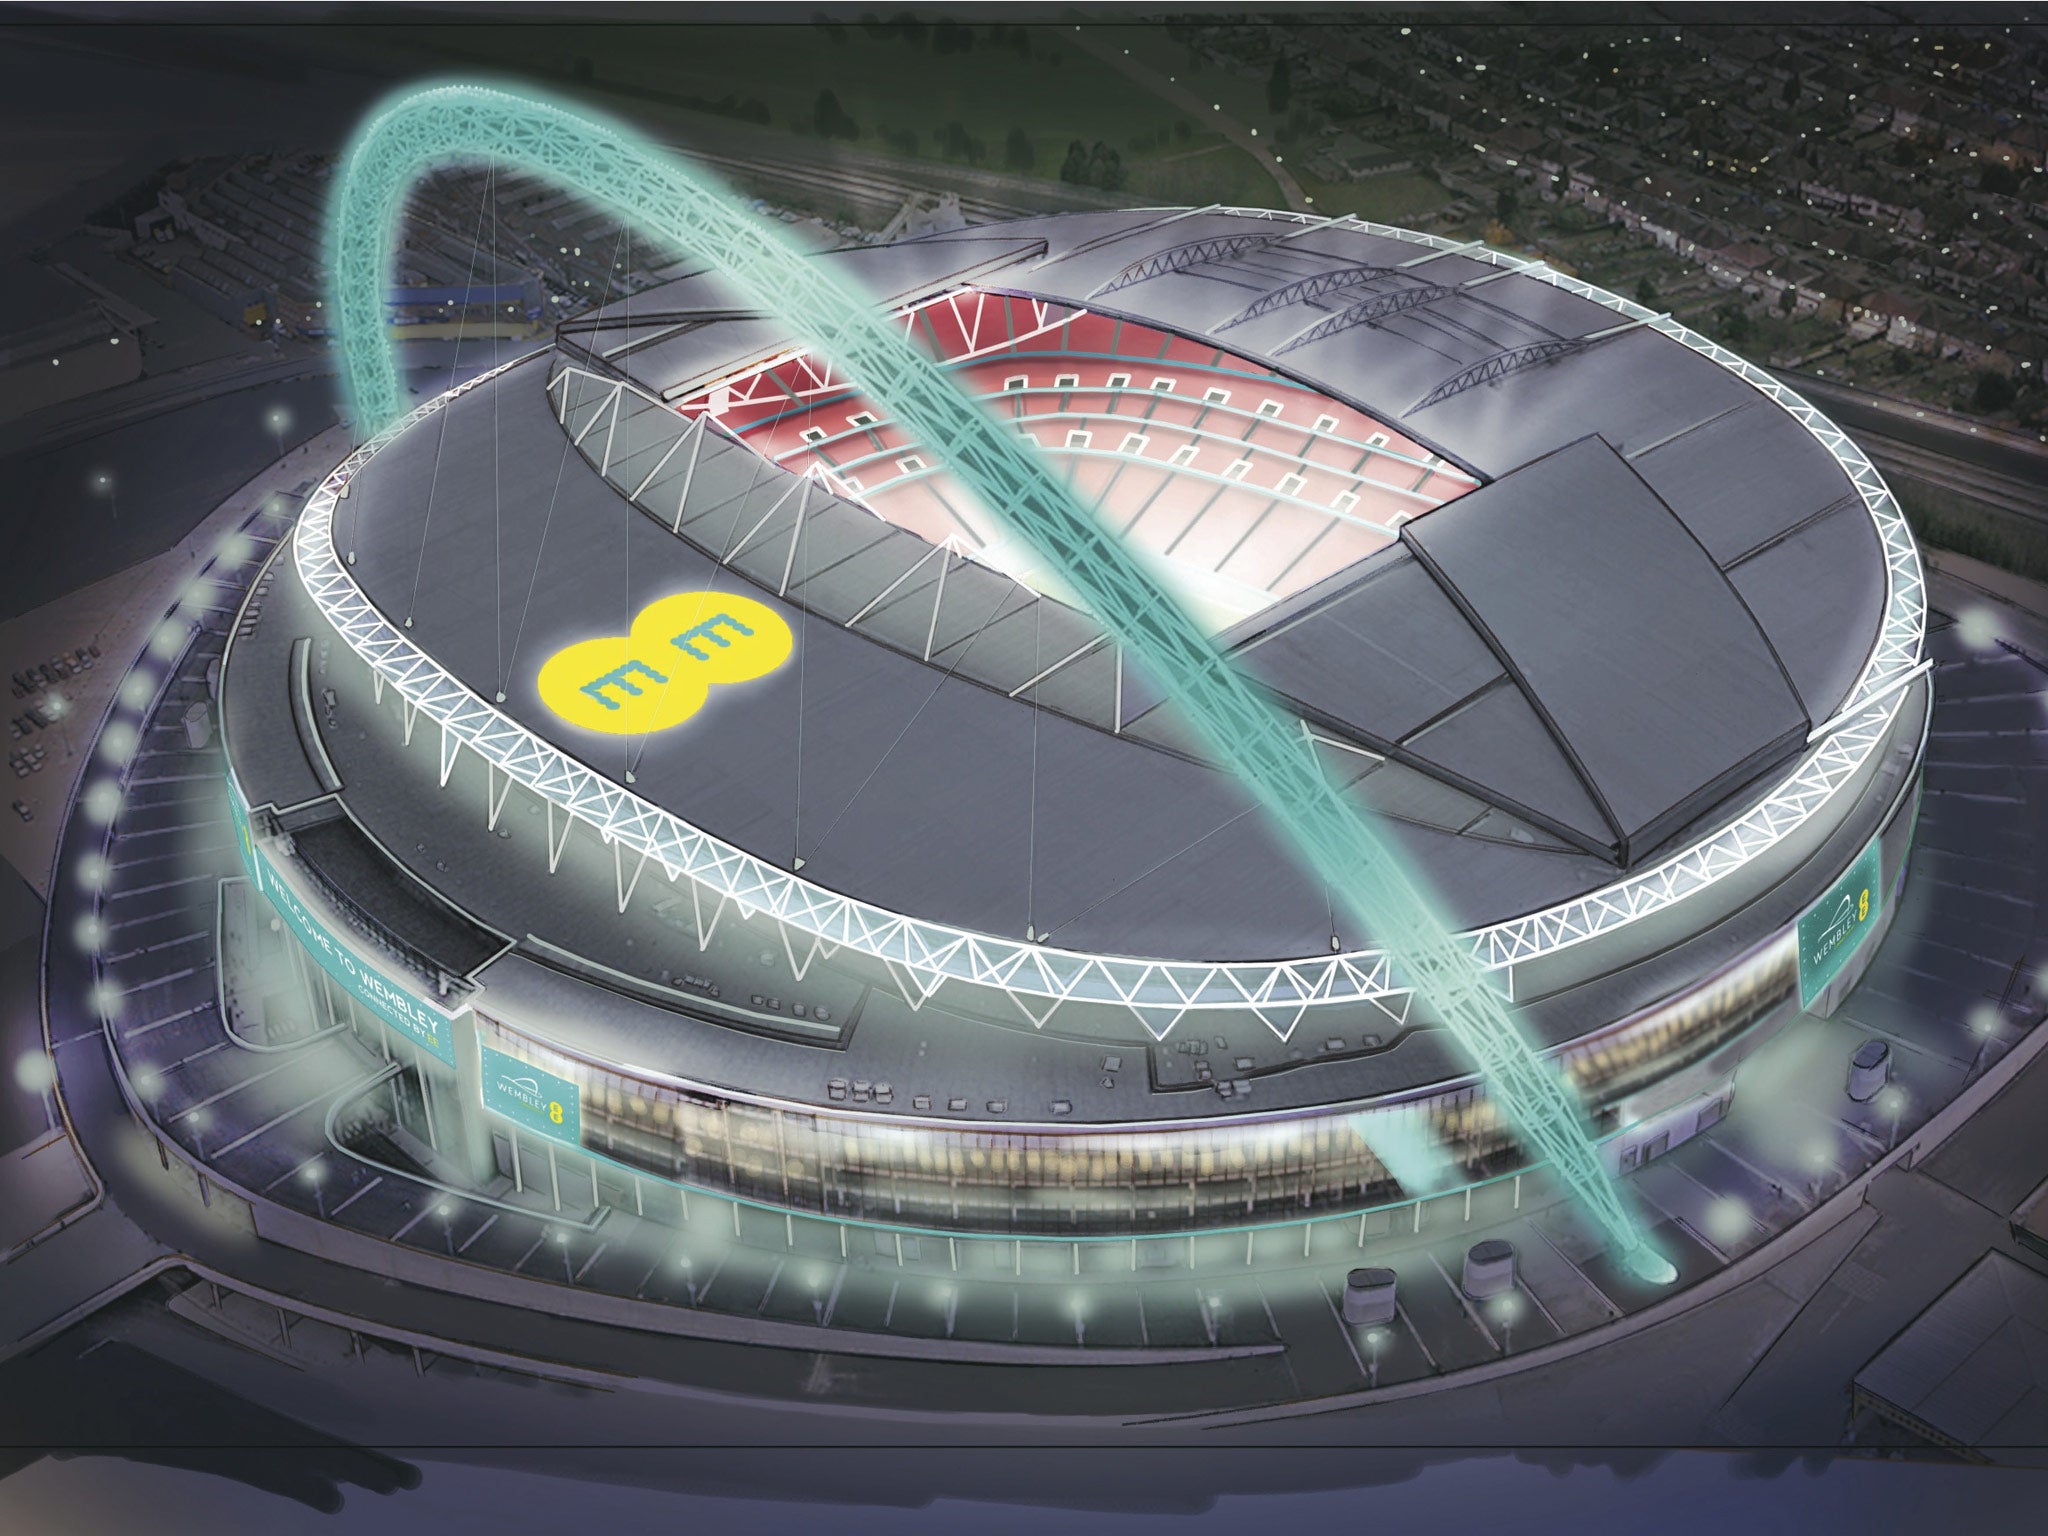 An artists impression of Wembley with the EE logo